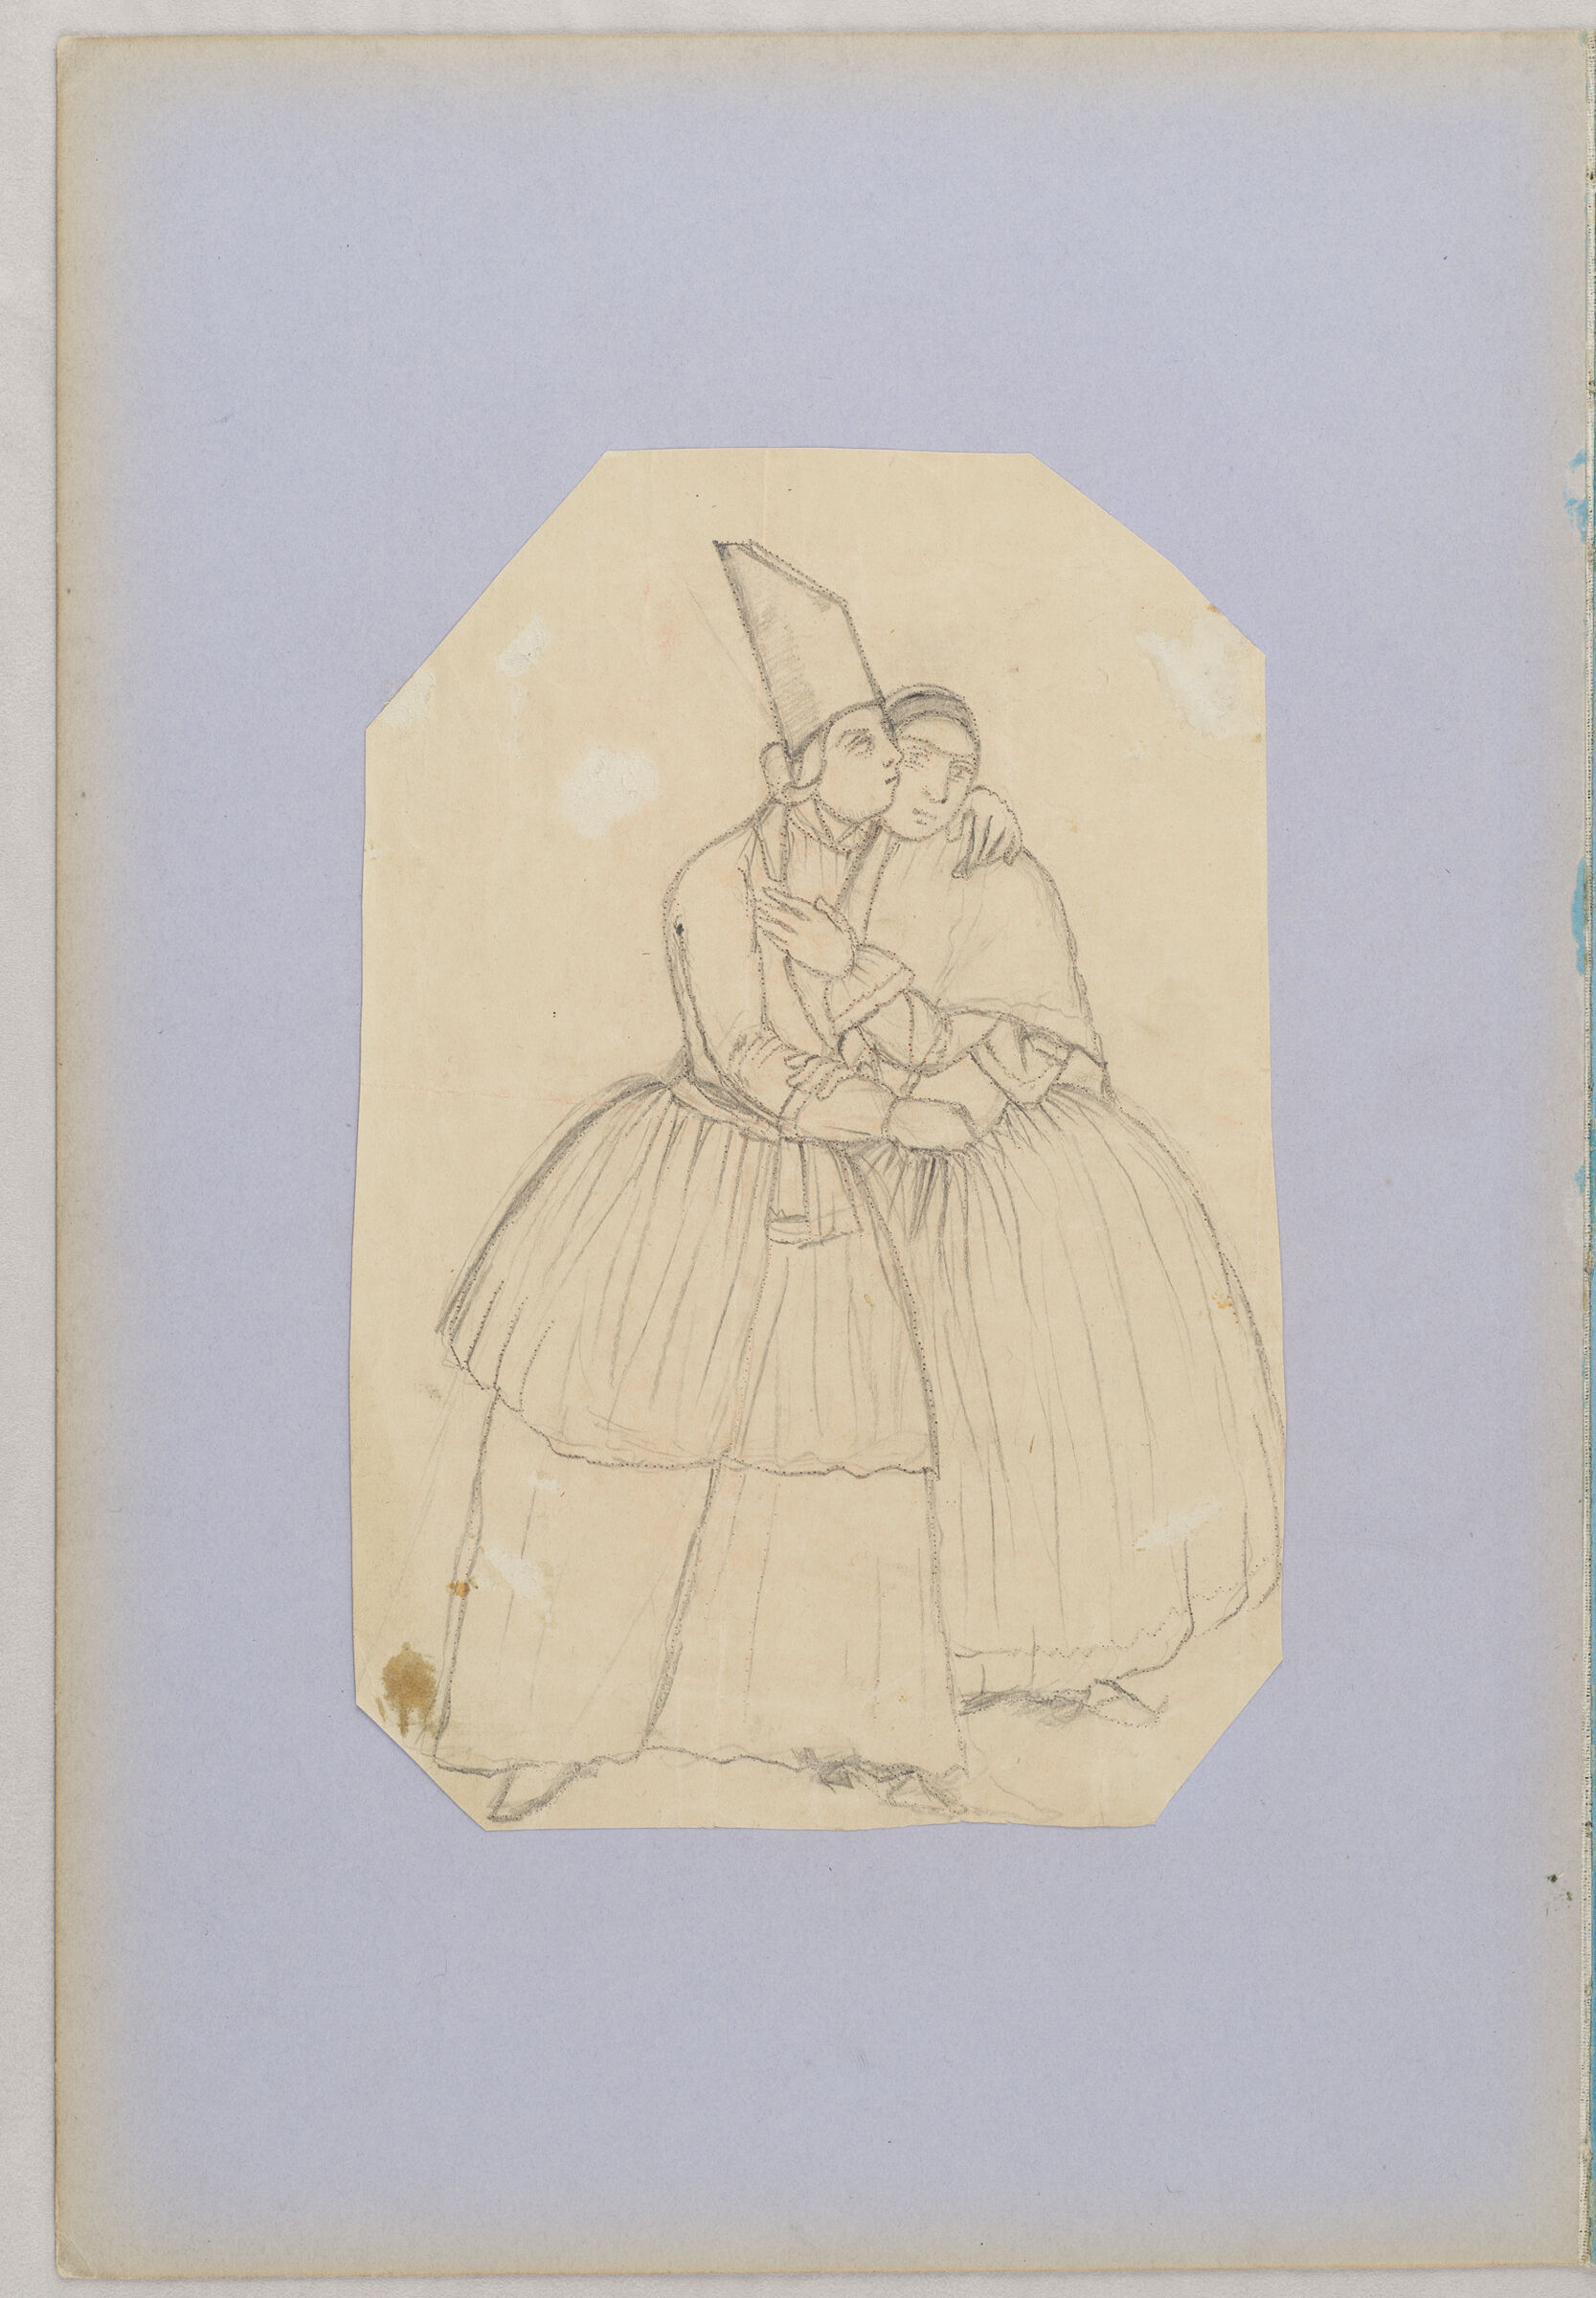 Folio 5 From An Album Of Drawings And Paintings: Embracing Couple (Recto); Seated Woman And Child In Classical Dress With Kneeling Attendant And Peacock (Verso)